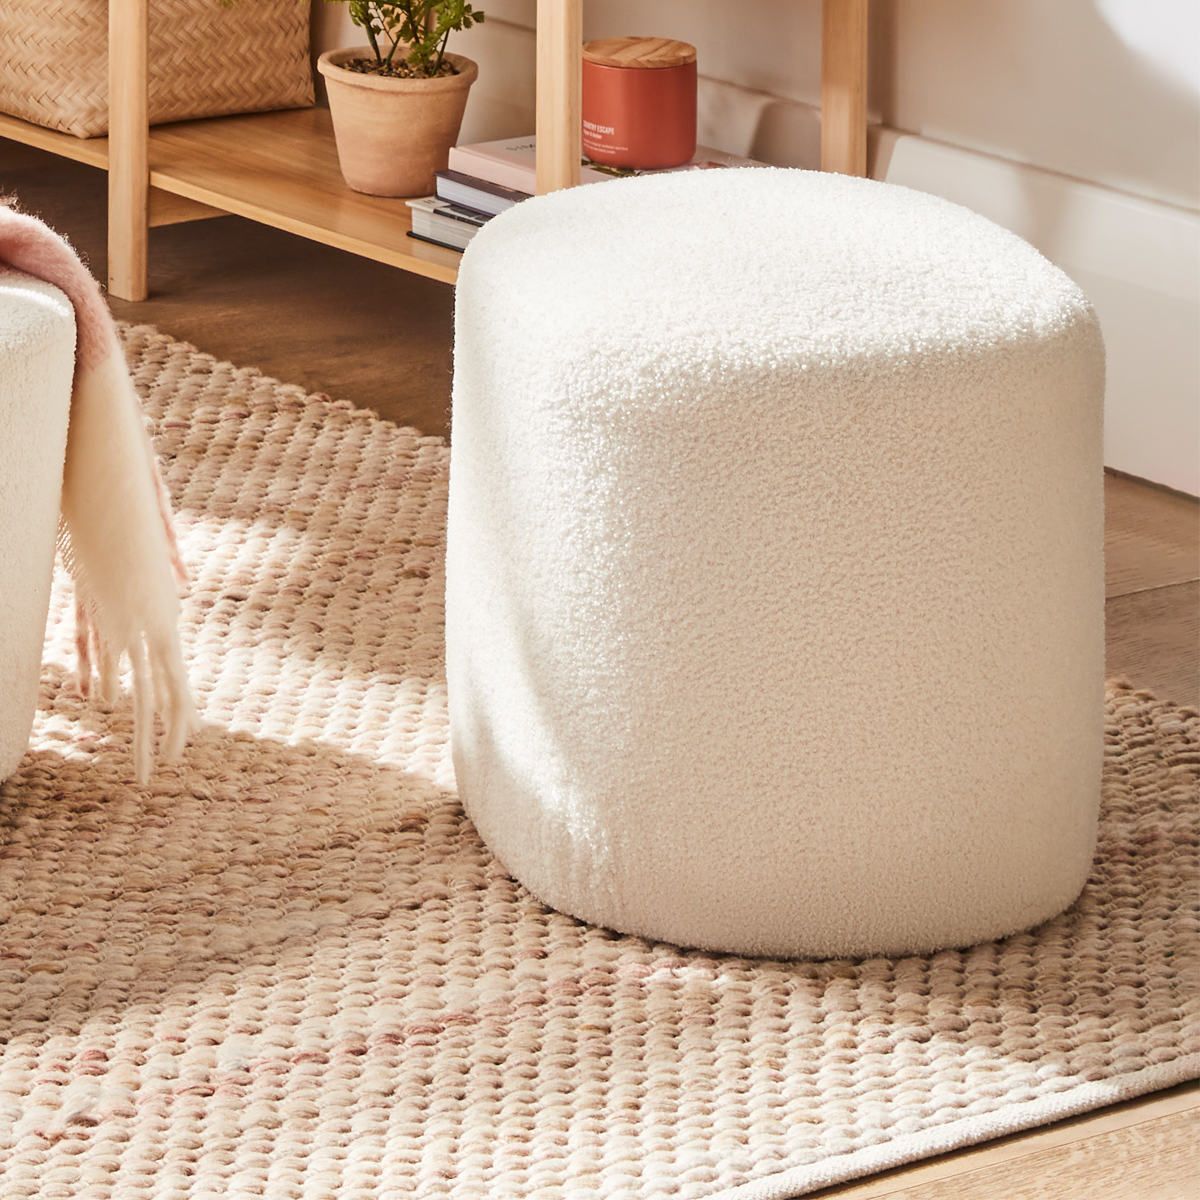 Brand New White Boucle Ottoman New Foot Stool Seat Chaise | Ebay Within Boucle Ottomans (View 10 of 15)